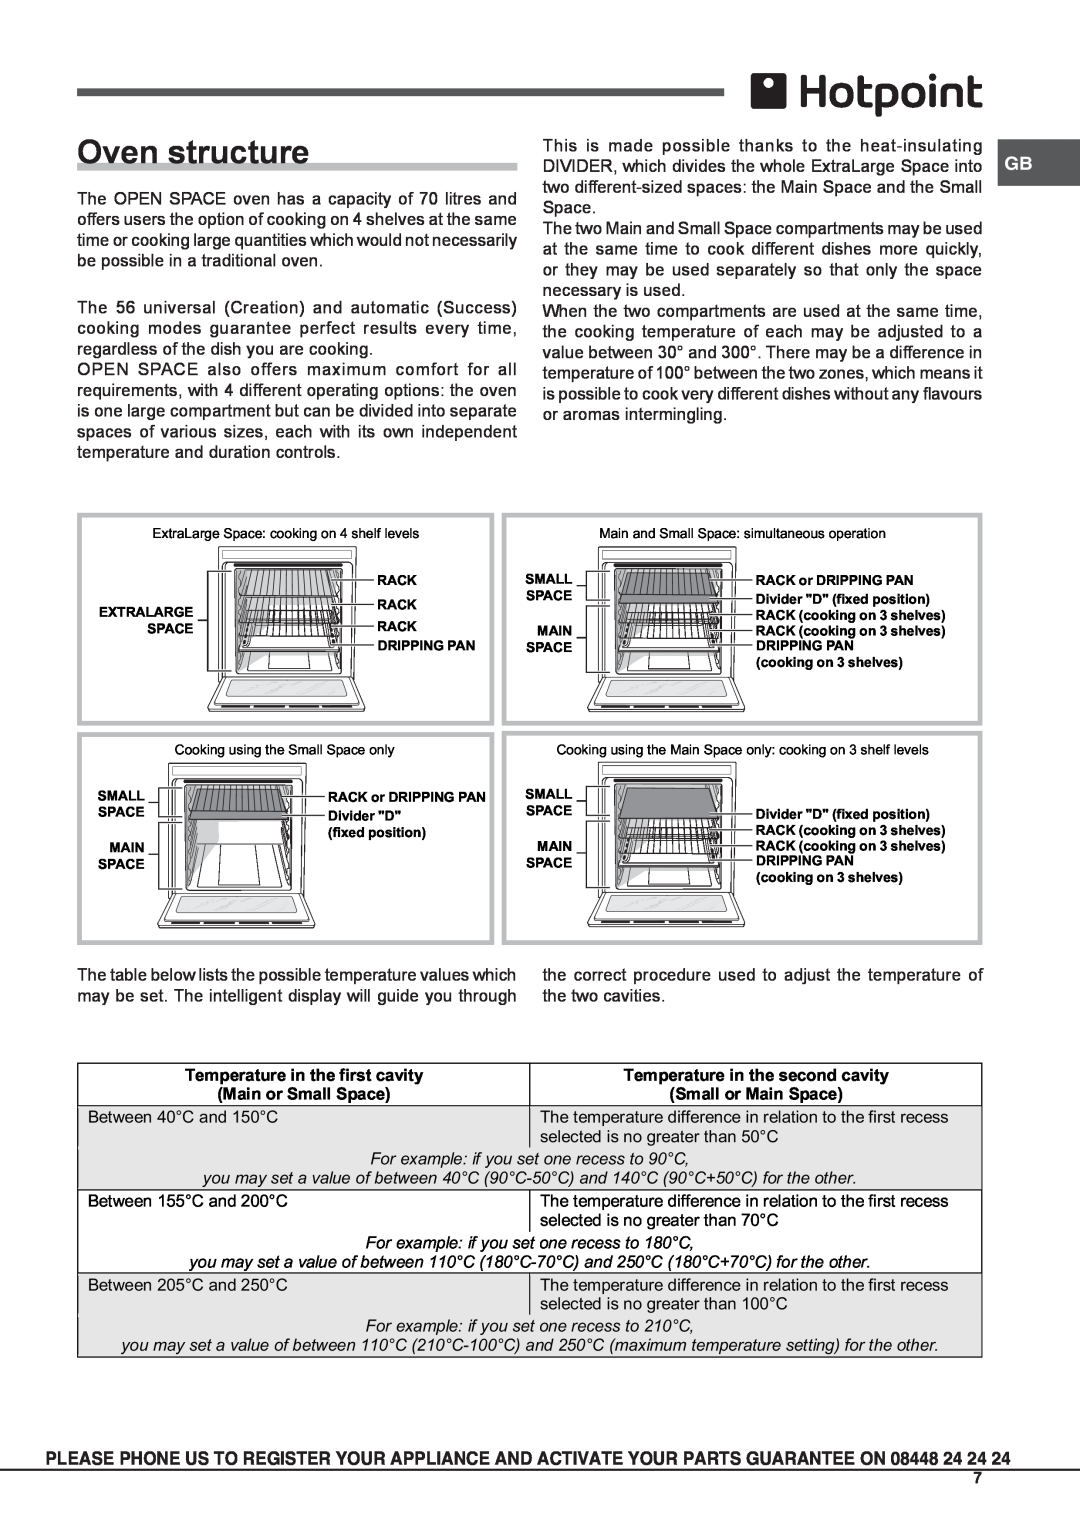 Hotpoint OSHS89EDC Oven structure, Temperature in the first cavity, Temperature in the second cavity, Main or Small Space 